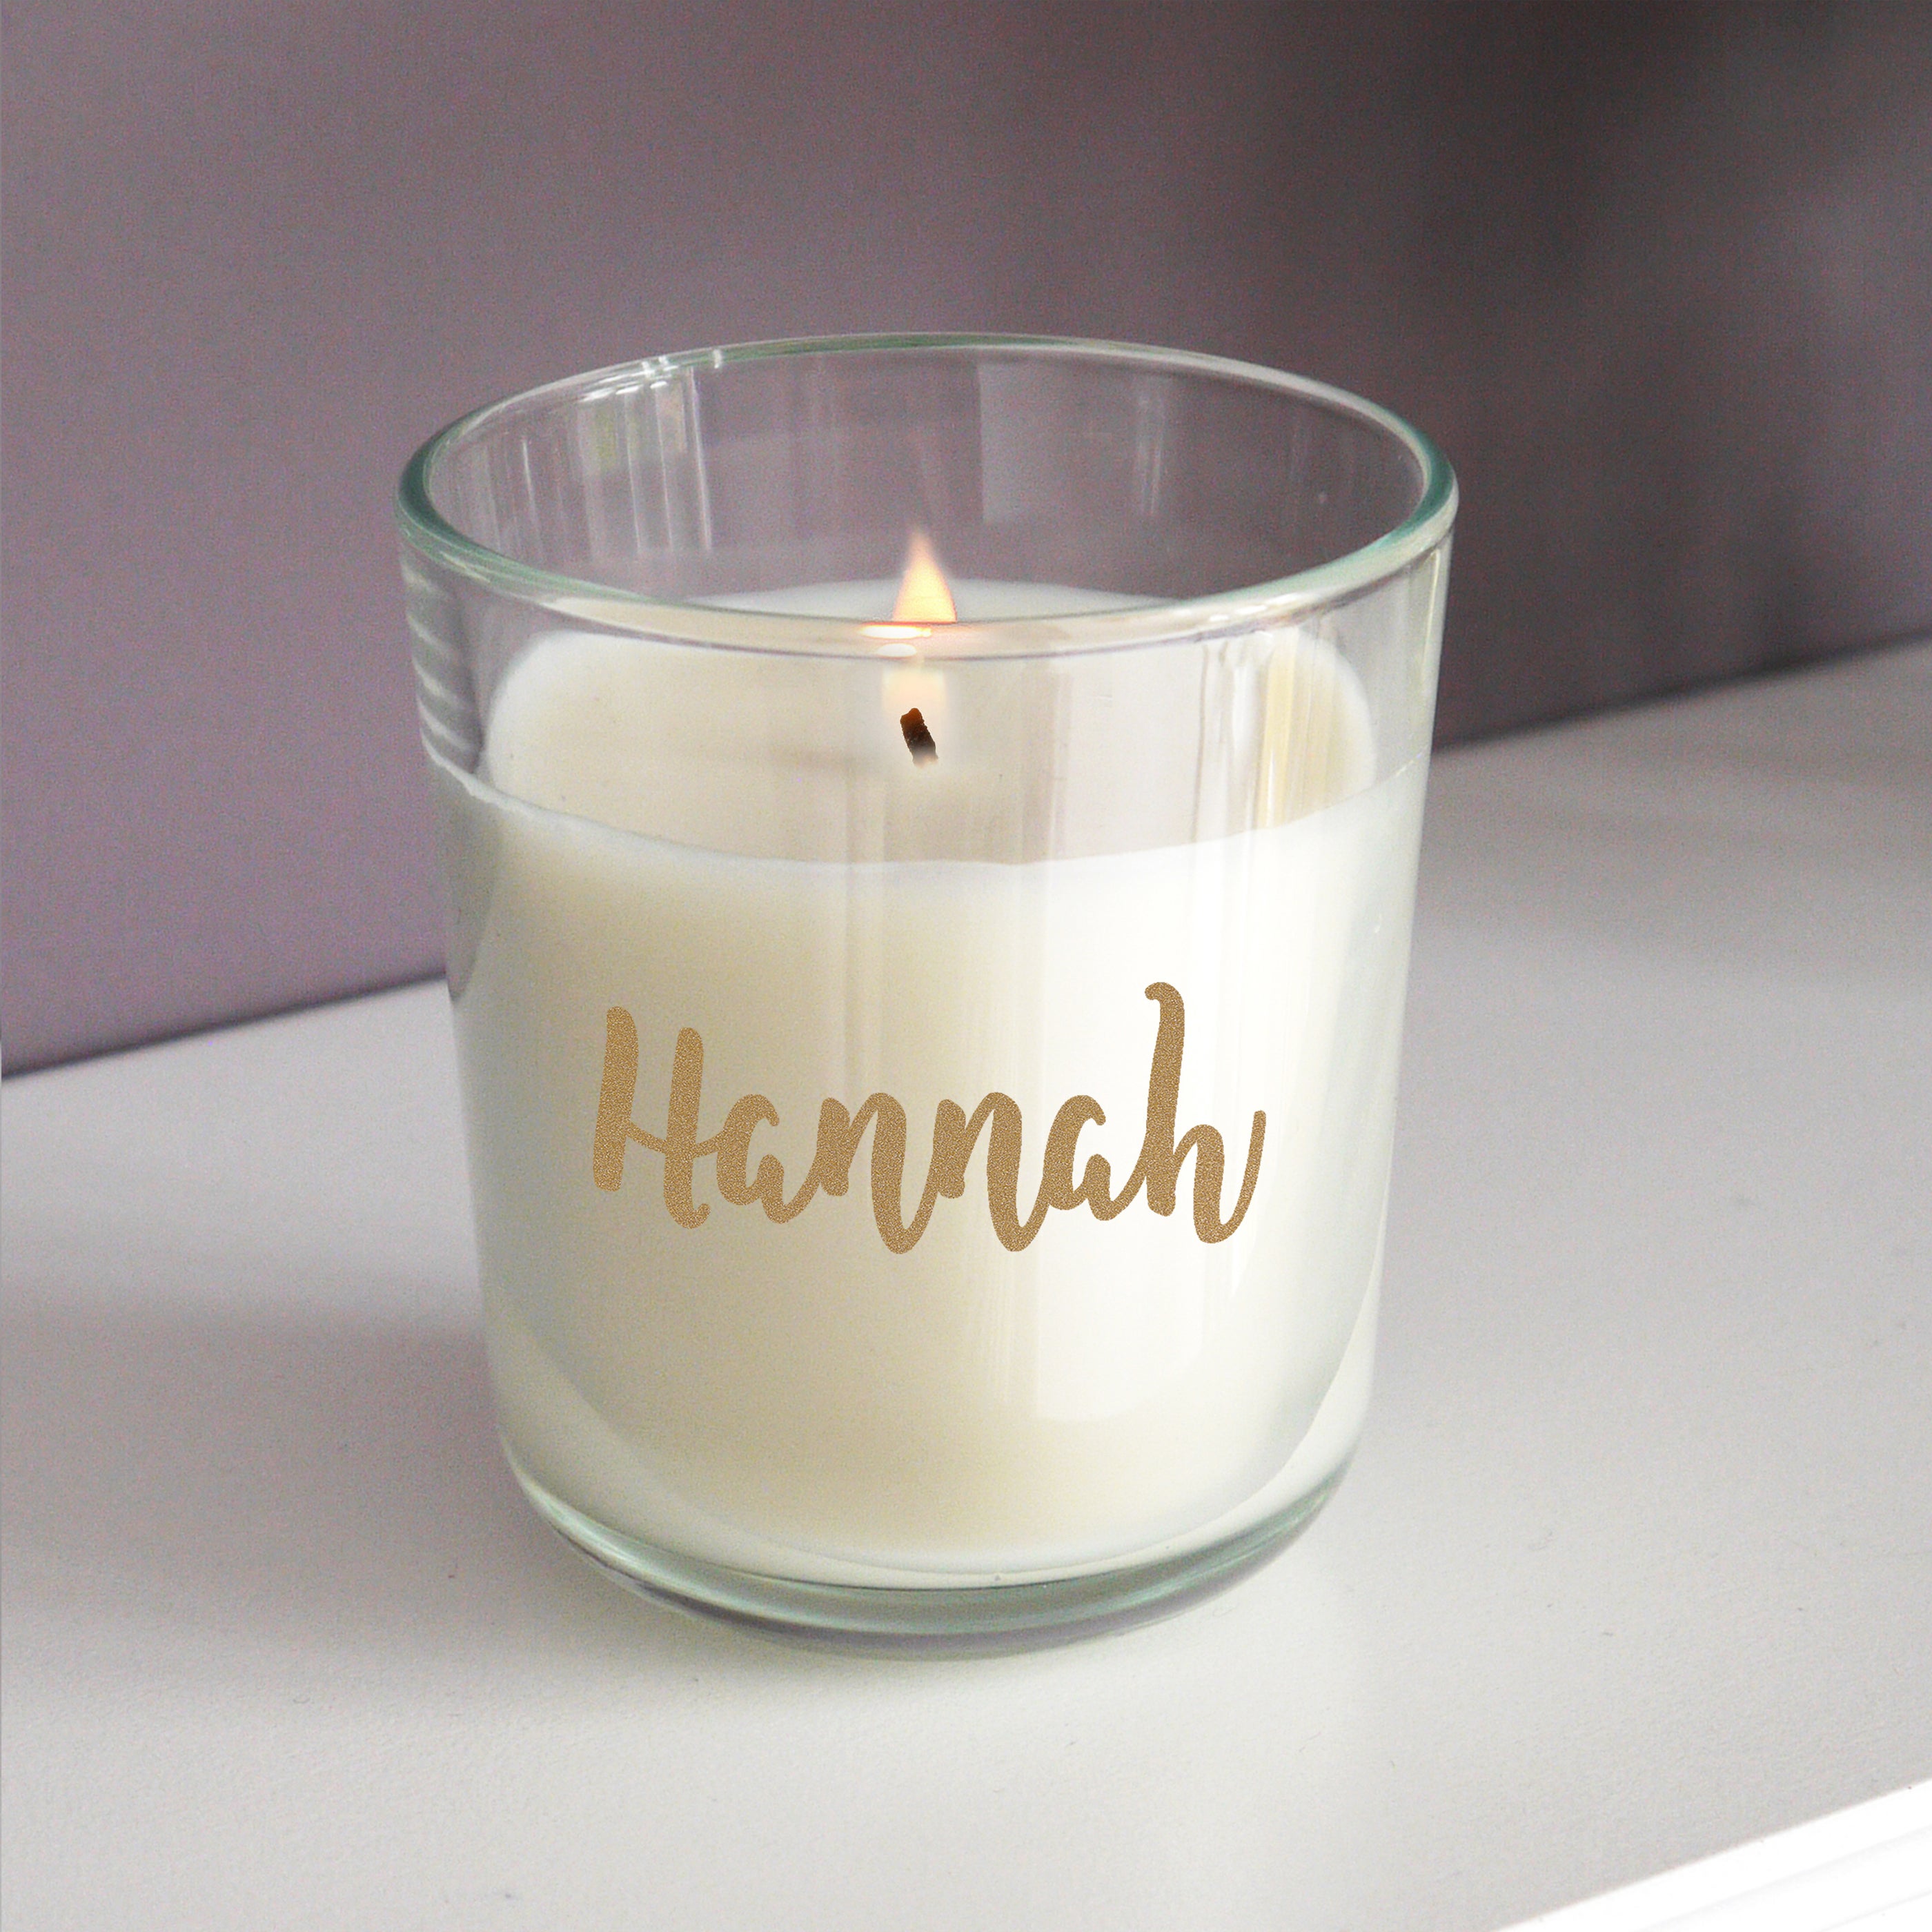 Personalised Gold Name Jar Candle